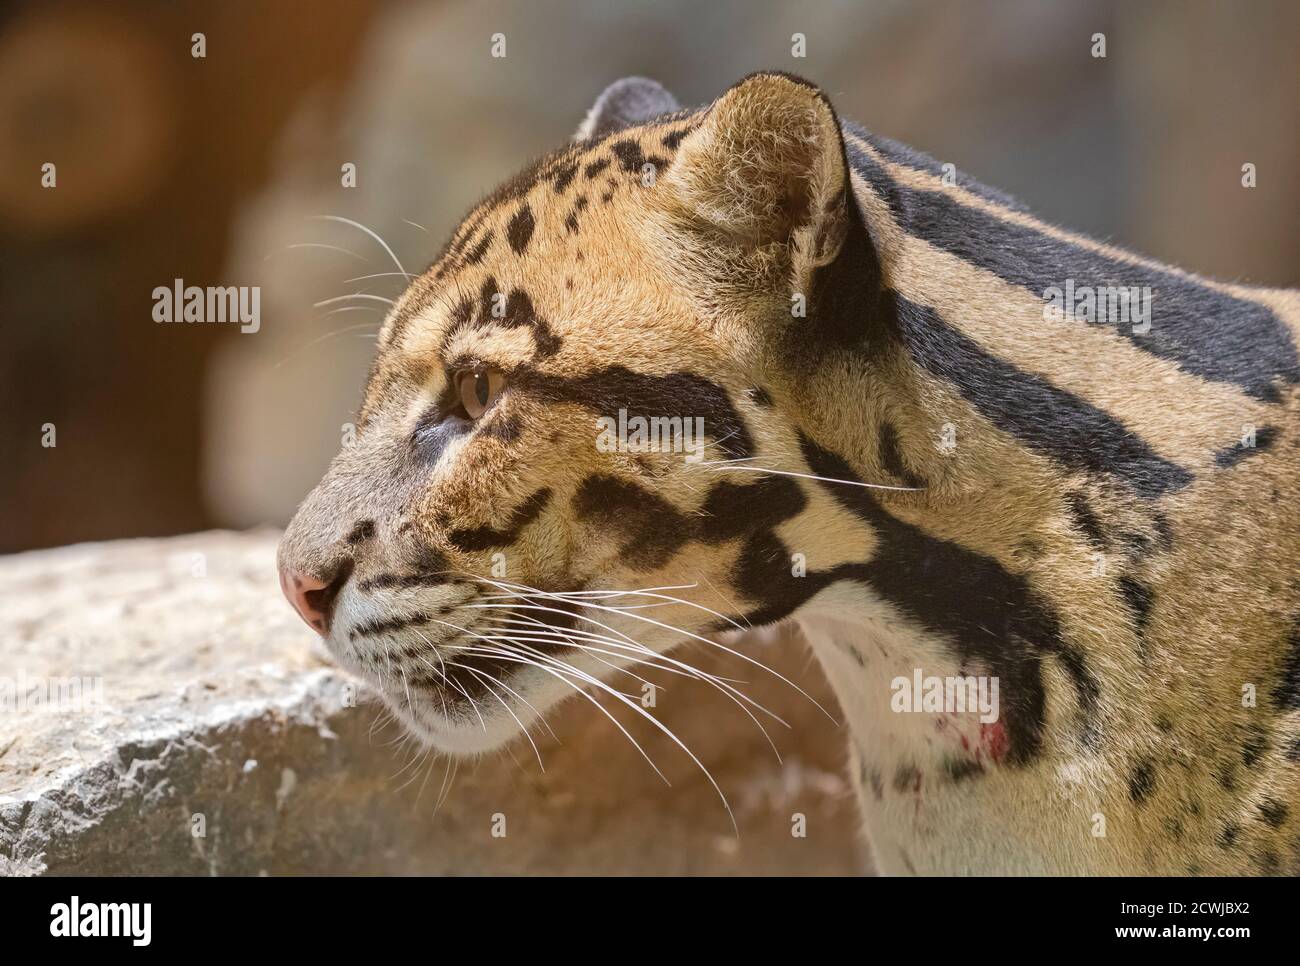 Close up view of a Clouded Leopard (Neofelis nebulosa) Stock Photo